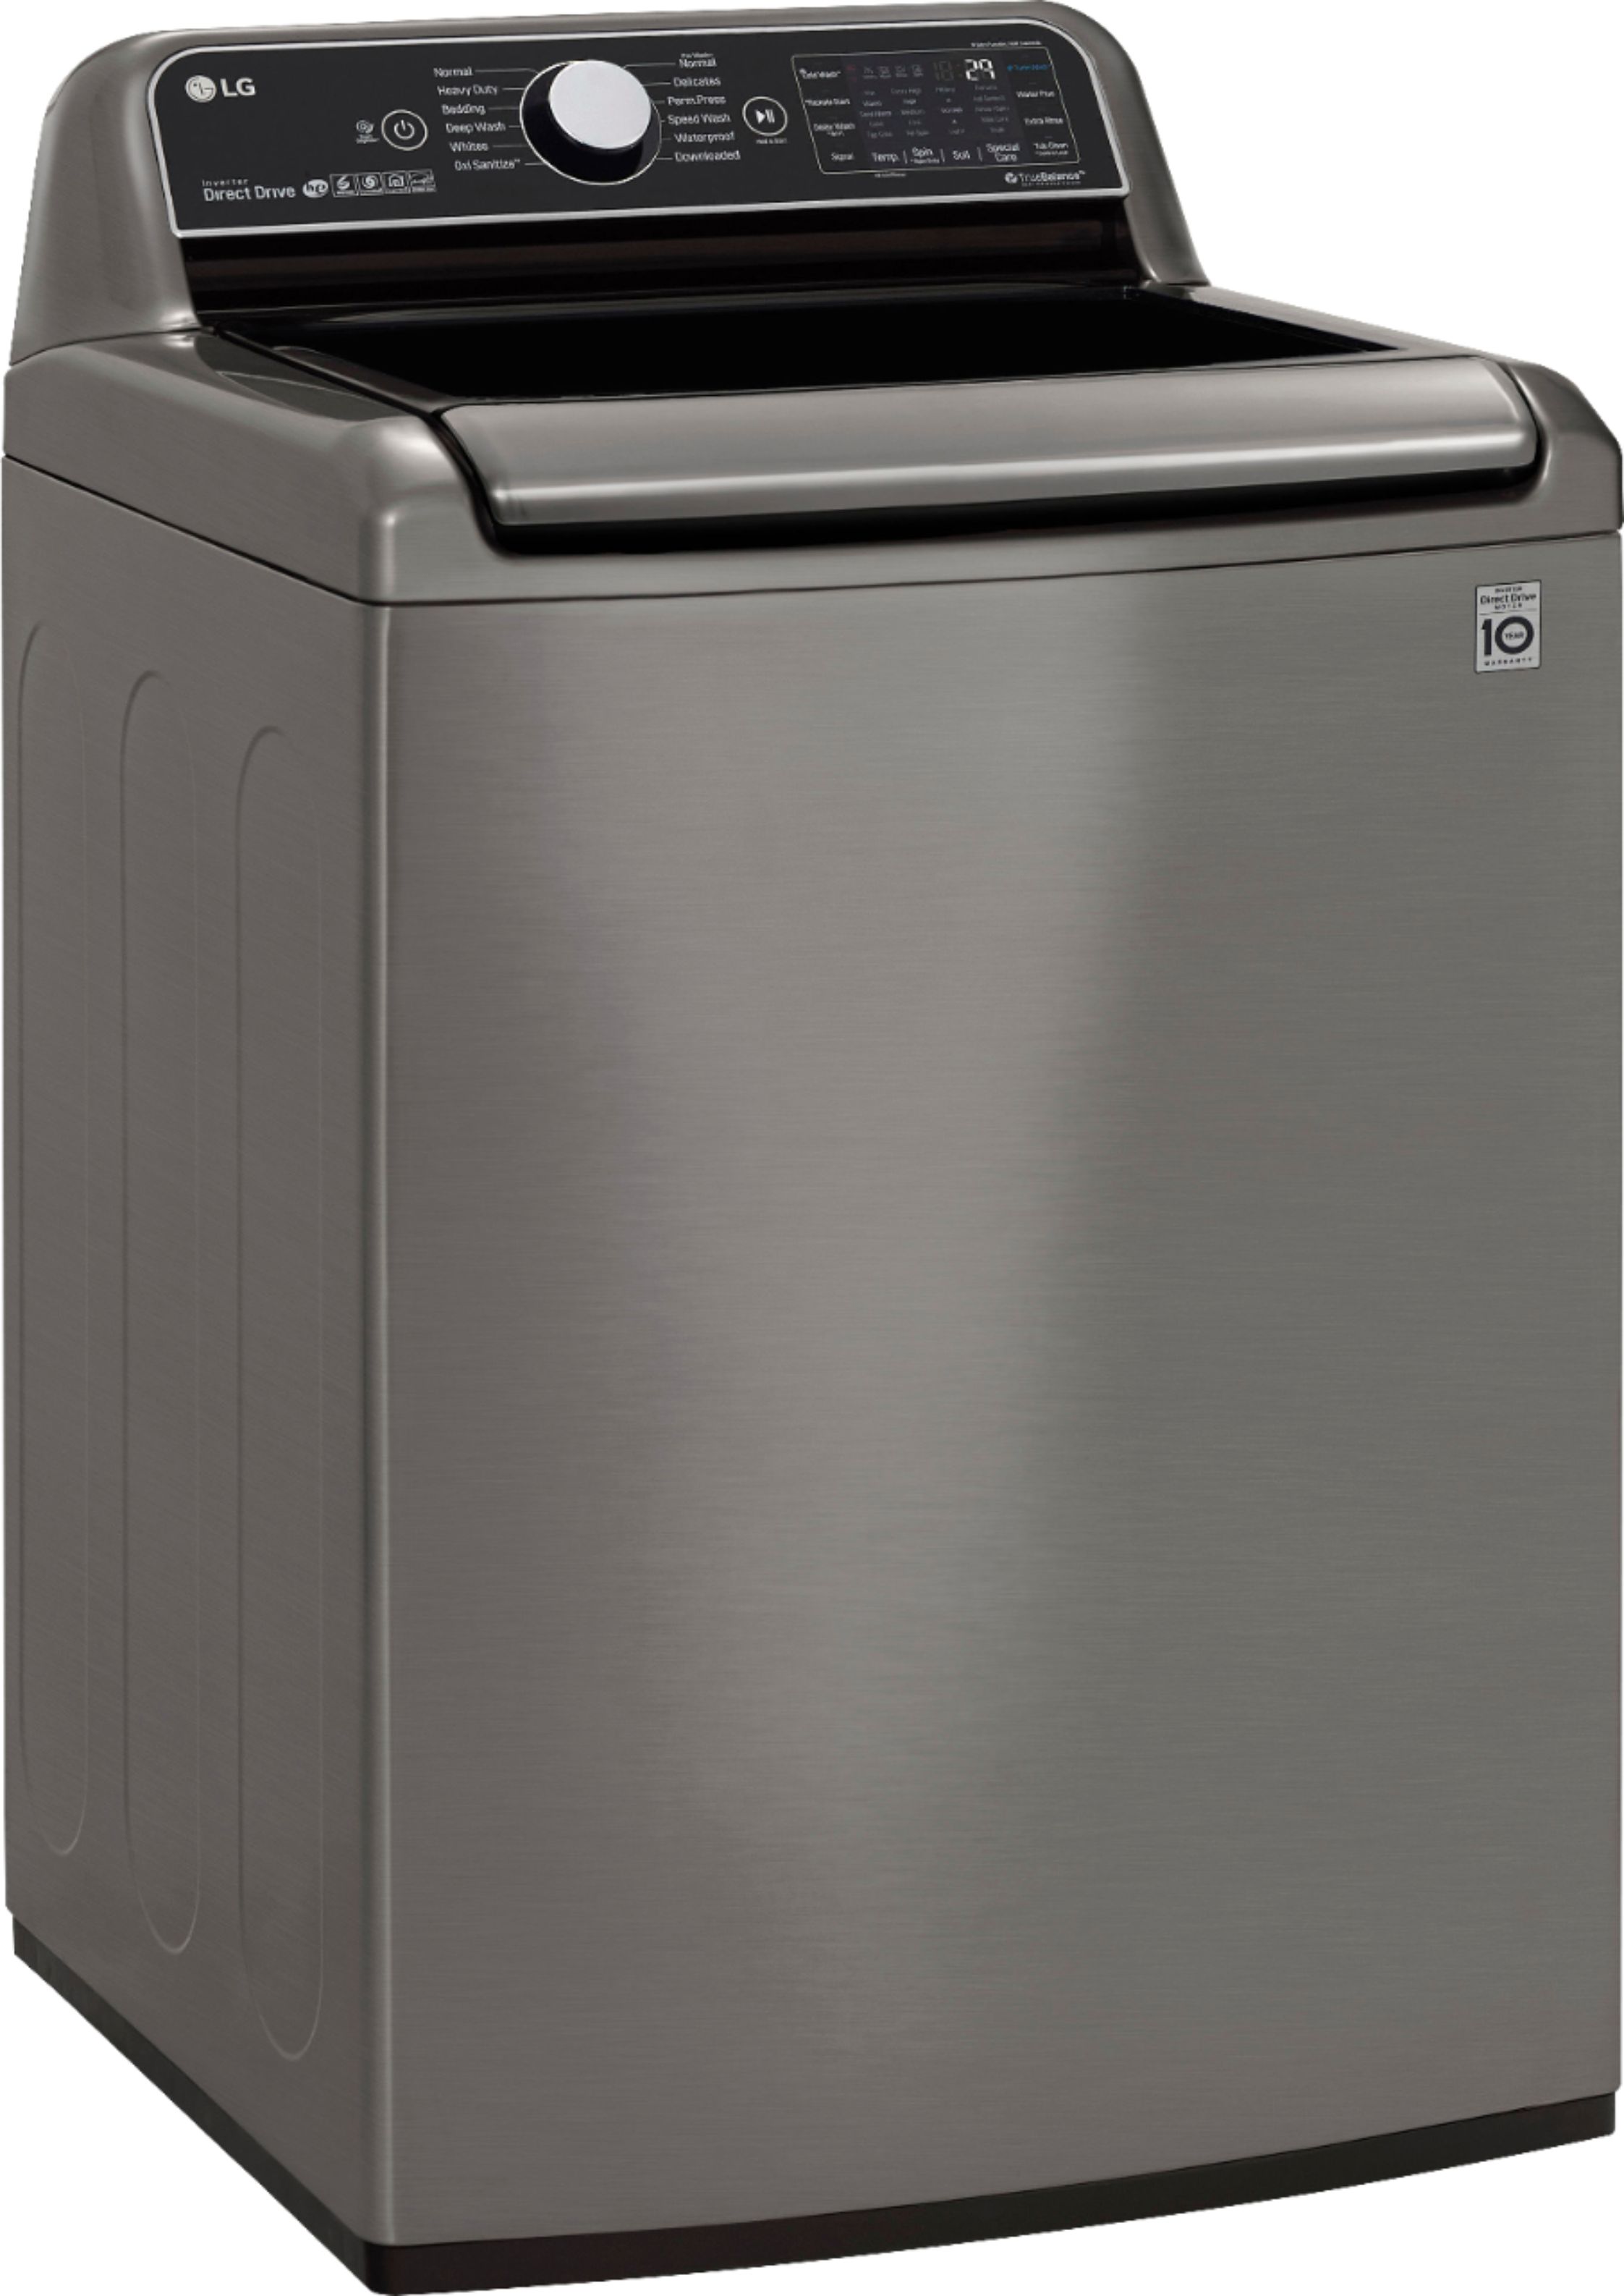 Angle View: LG - 5.5 Cu. Ft. High-Efficiency Smart Top Load Washer with TurboWash3D Technology - Graphite Steel